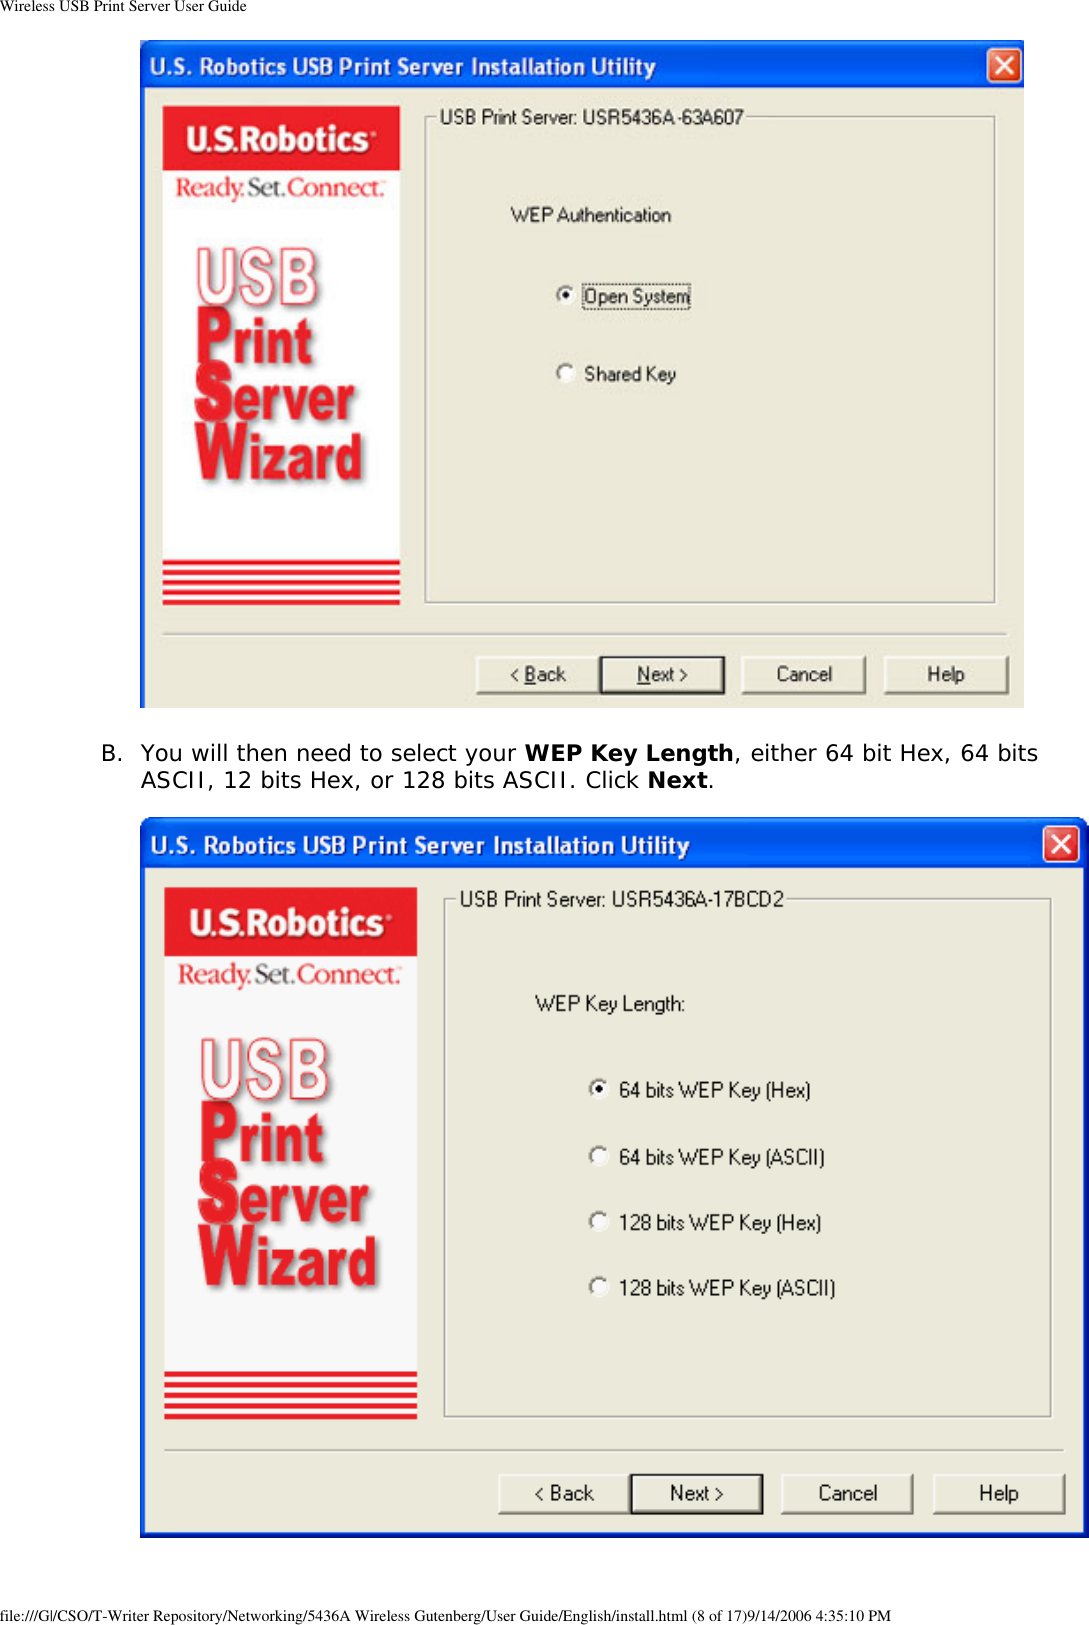 Wireless USB Print Server User Guide B.  You will then need to select your WEP Key Length, either 64 bit Hex, 64 bits ASCII, 12 bits Hex, or 128 bits ASCII. Click Next.    file:///G|/CSO/T-Writer Repository/Networking/5436A Wireless Gutenberg/User Guide/English/install.html (8 of 17)9/14/2006 4:35:10 PM